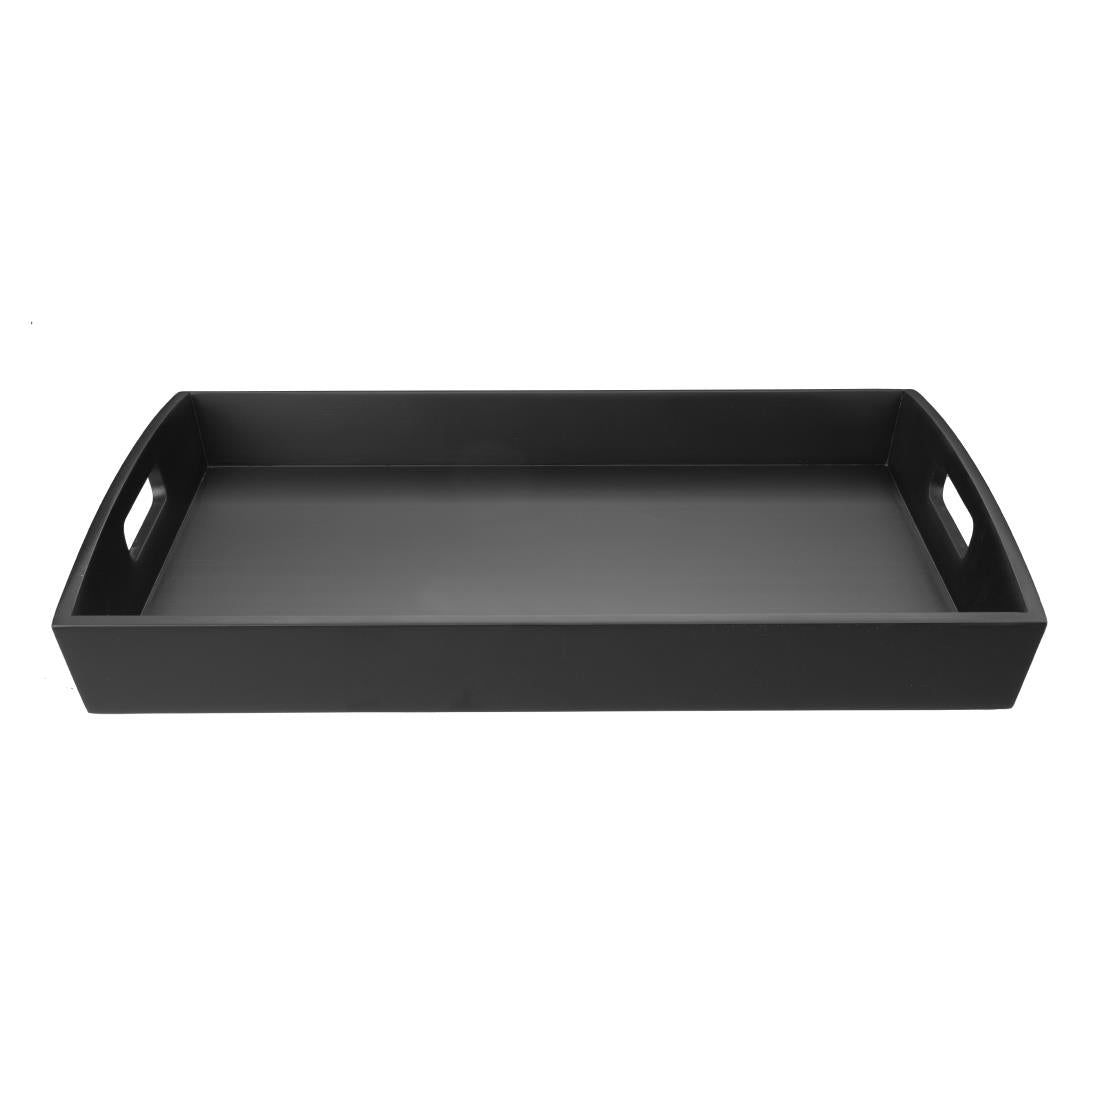 DP883 Olympia Bamboo Black Large Serving Tray 510x350mm